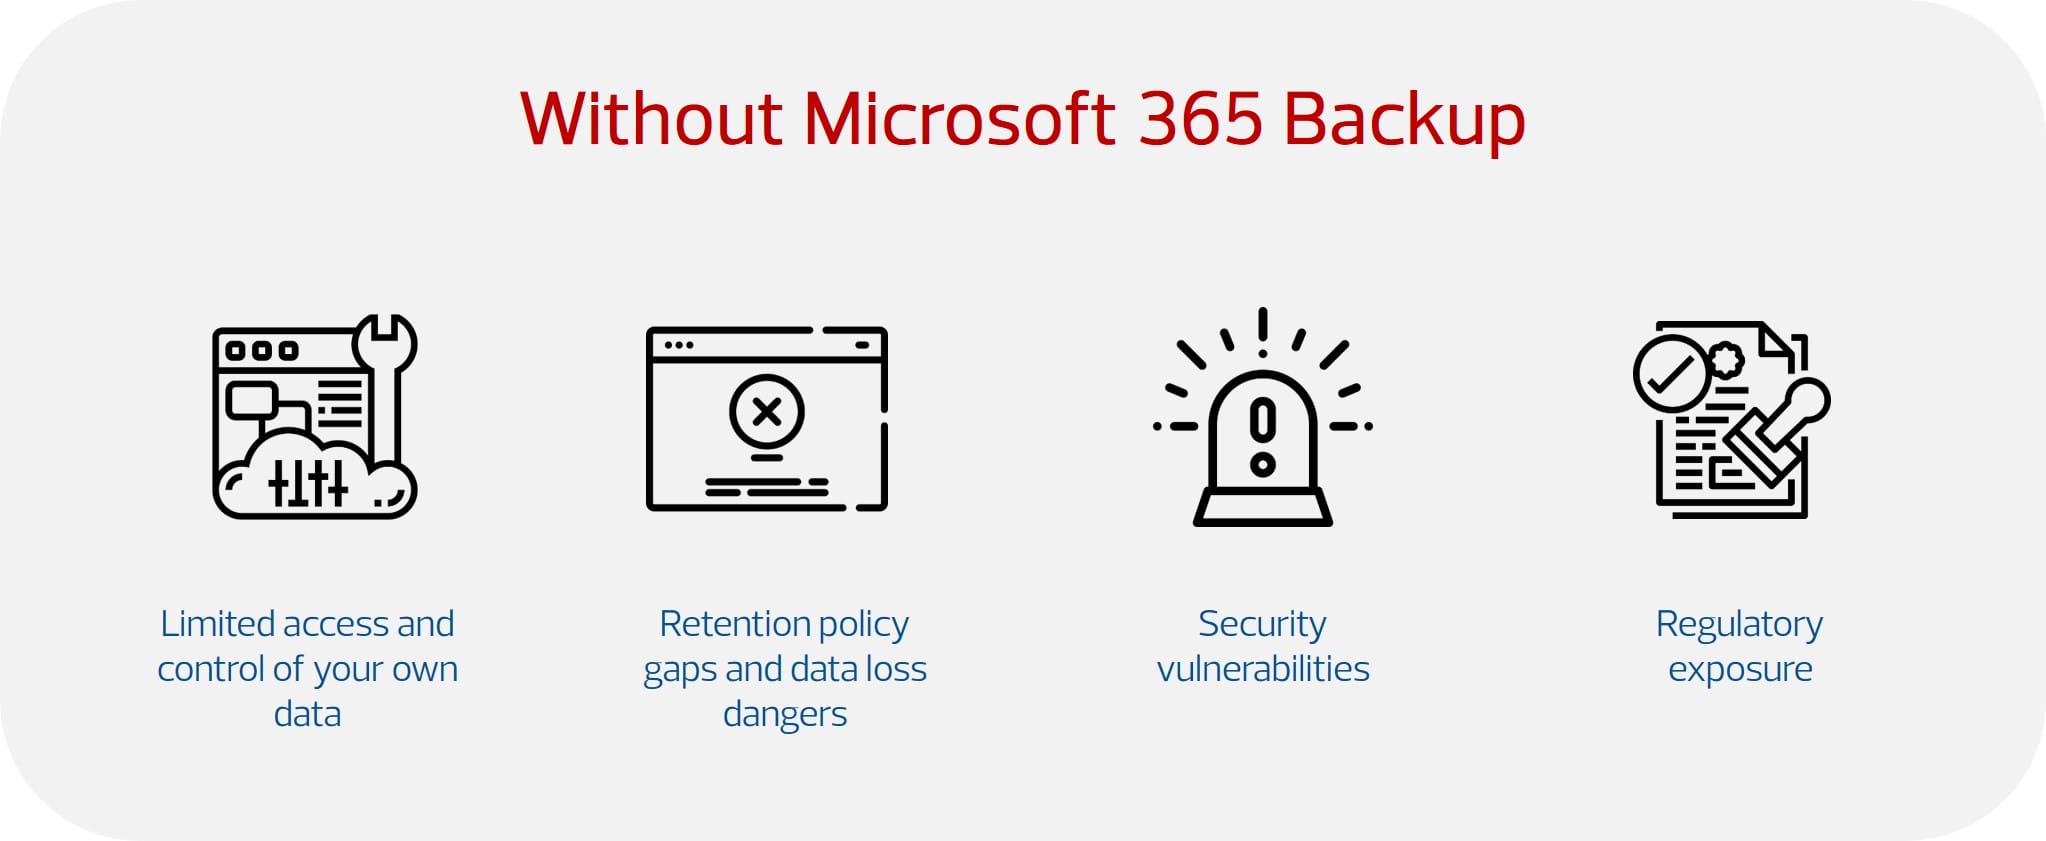 What Happen When You Don’t Have Microsoft 365 Backup- Limited access and control of your own data, retention policy gaps and data loss dangers, security vulnerabilities, regulatory exposure